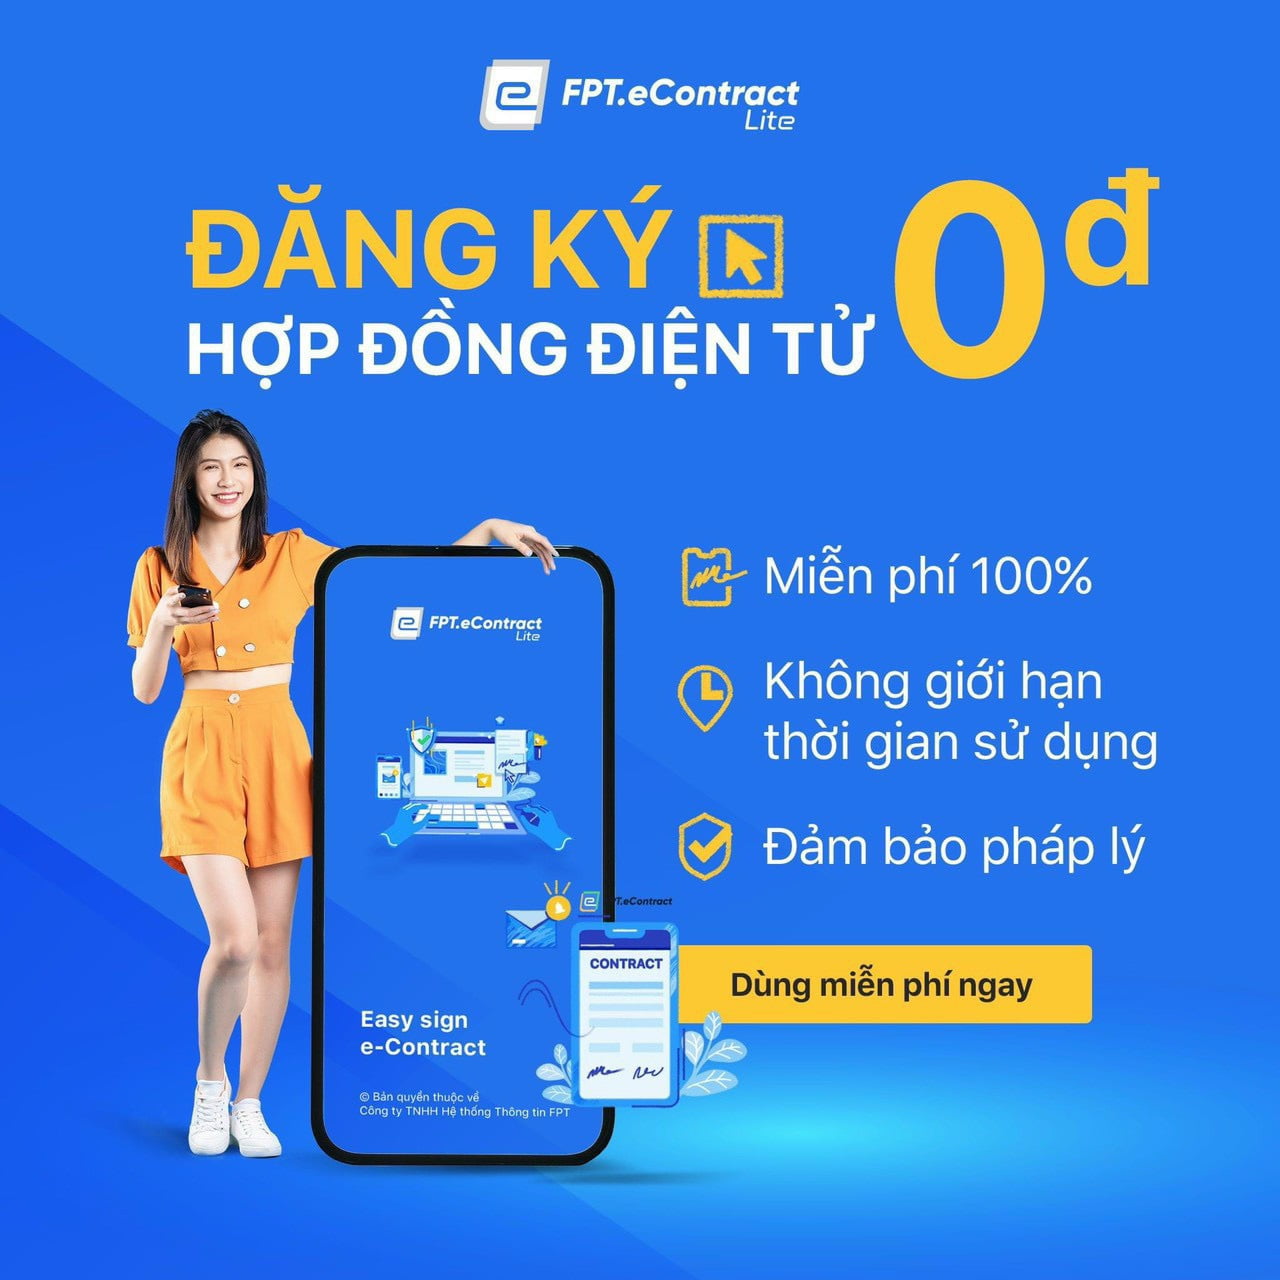 HỢP ĐỒNG ĐIỆN TỬ FPT ECONTRACT